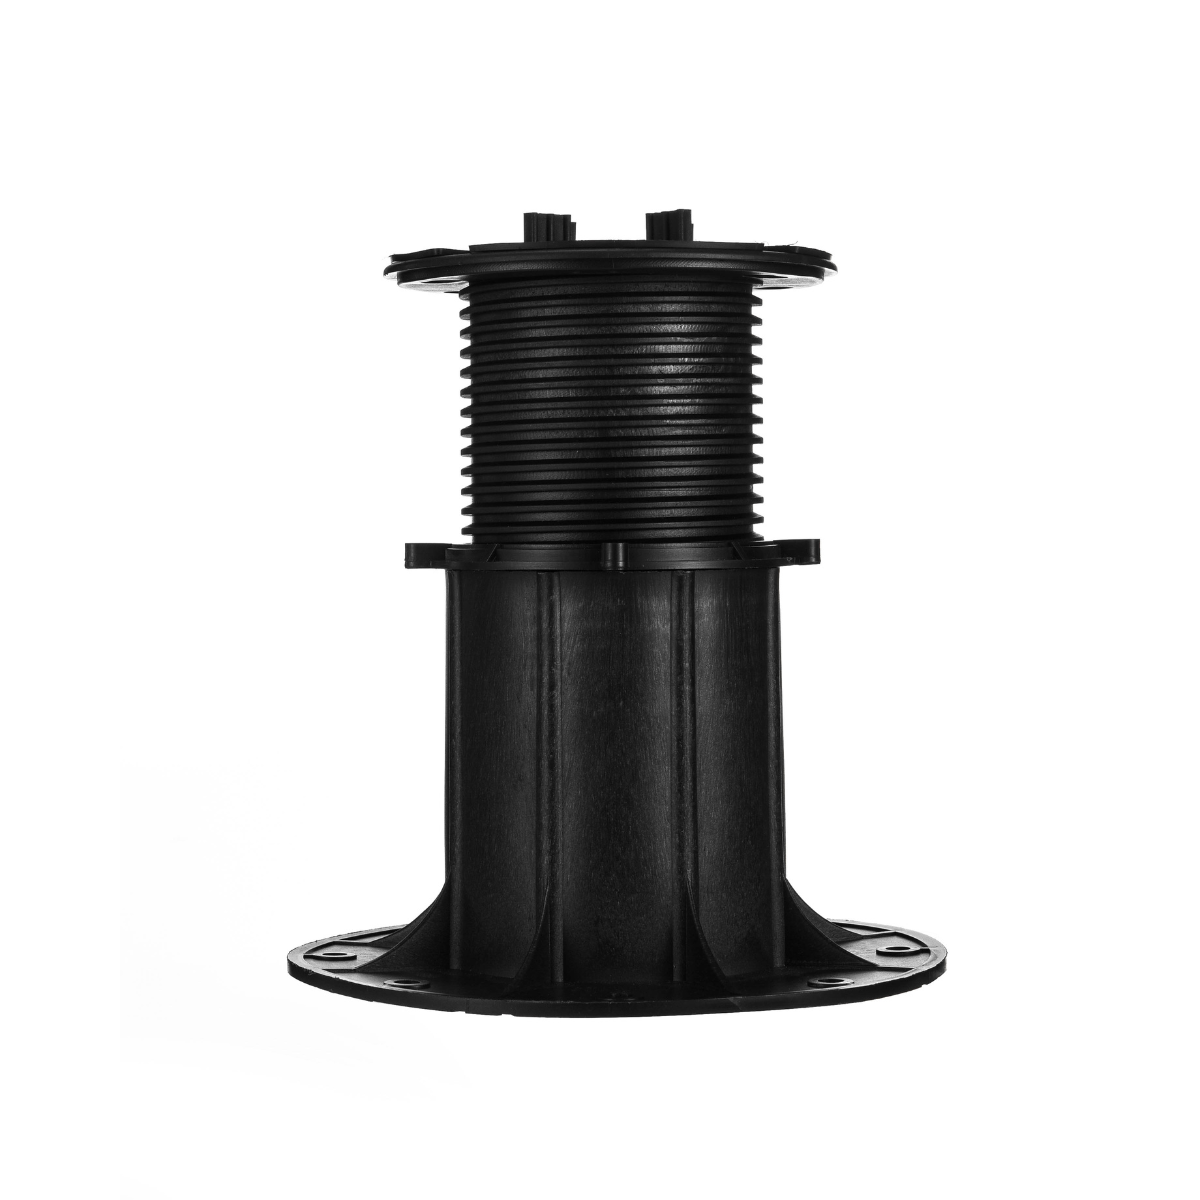 Adjustable Pedestal Universal support for waterscape and Stone brick paving Ground reinforced load bearing